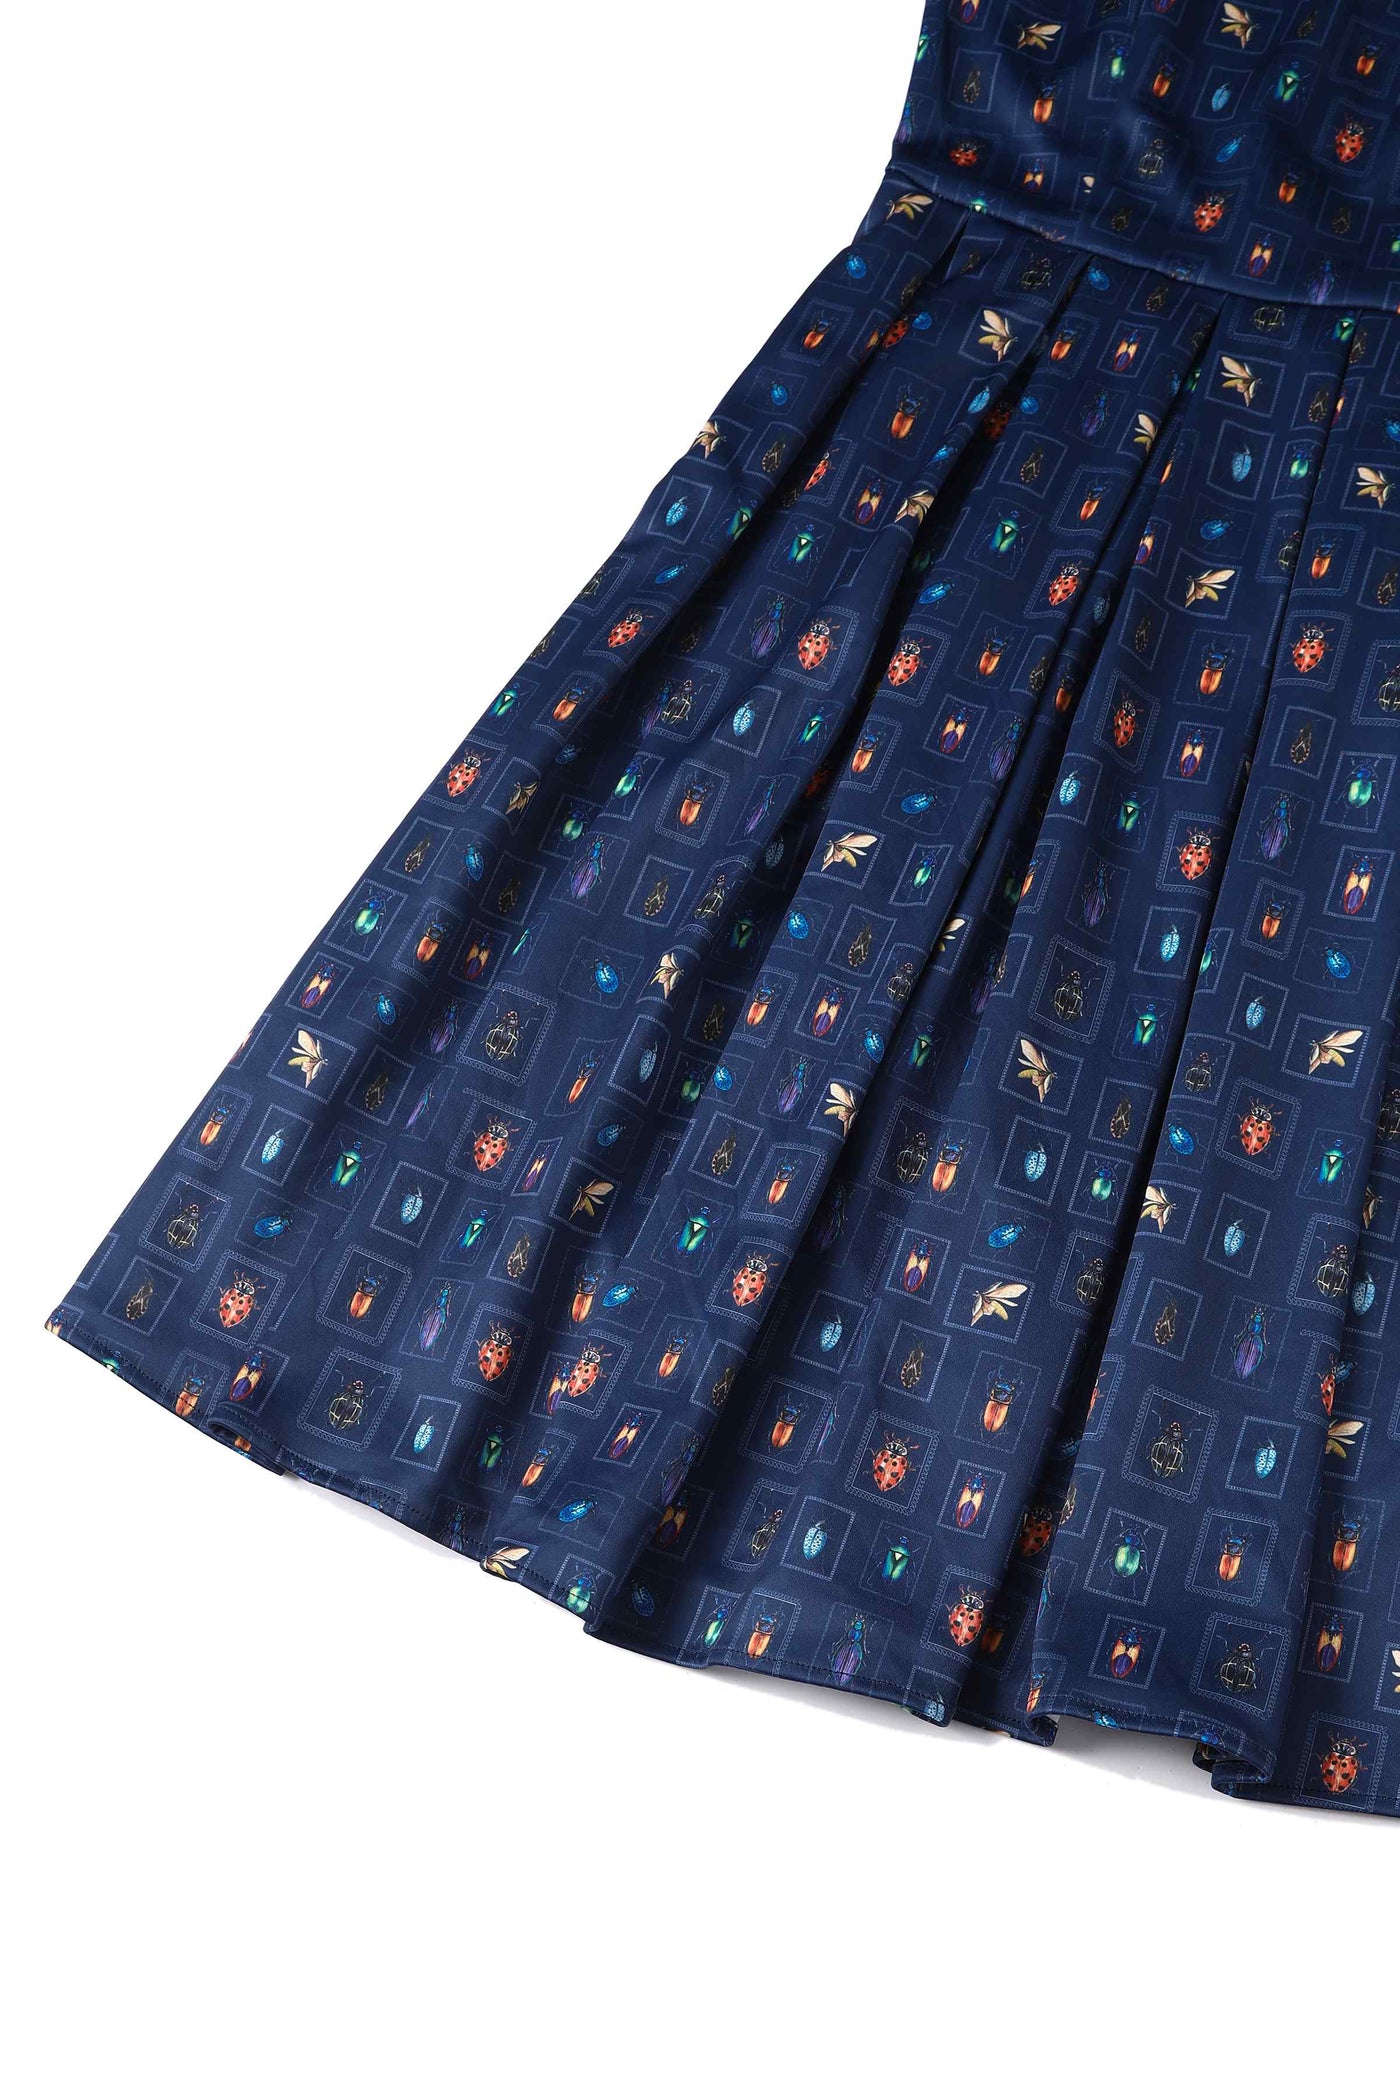 Bug collection print dress in navy blue